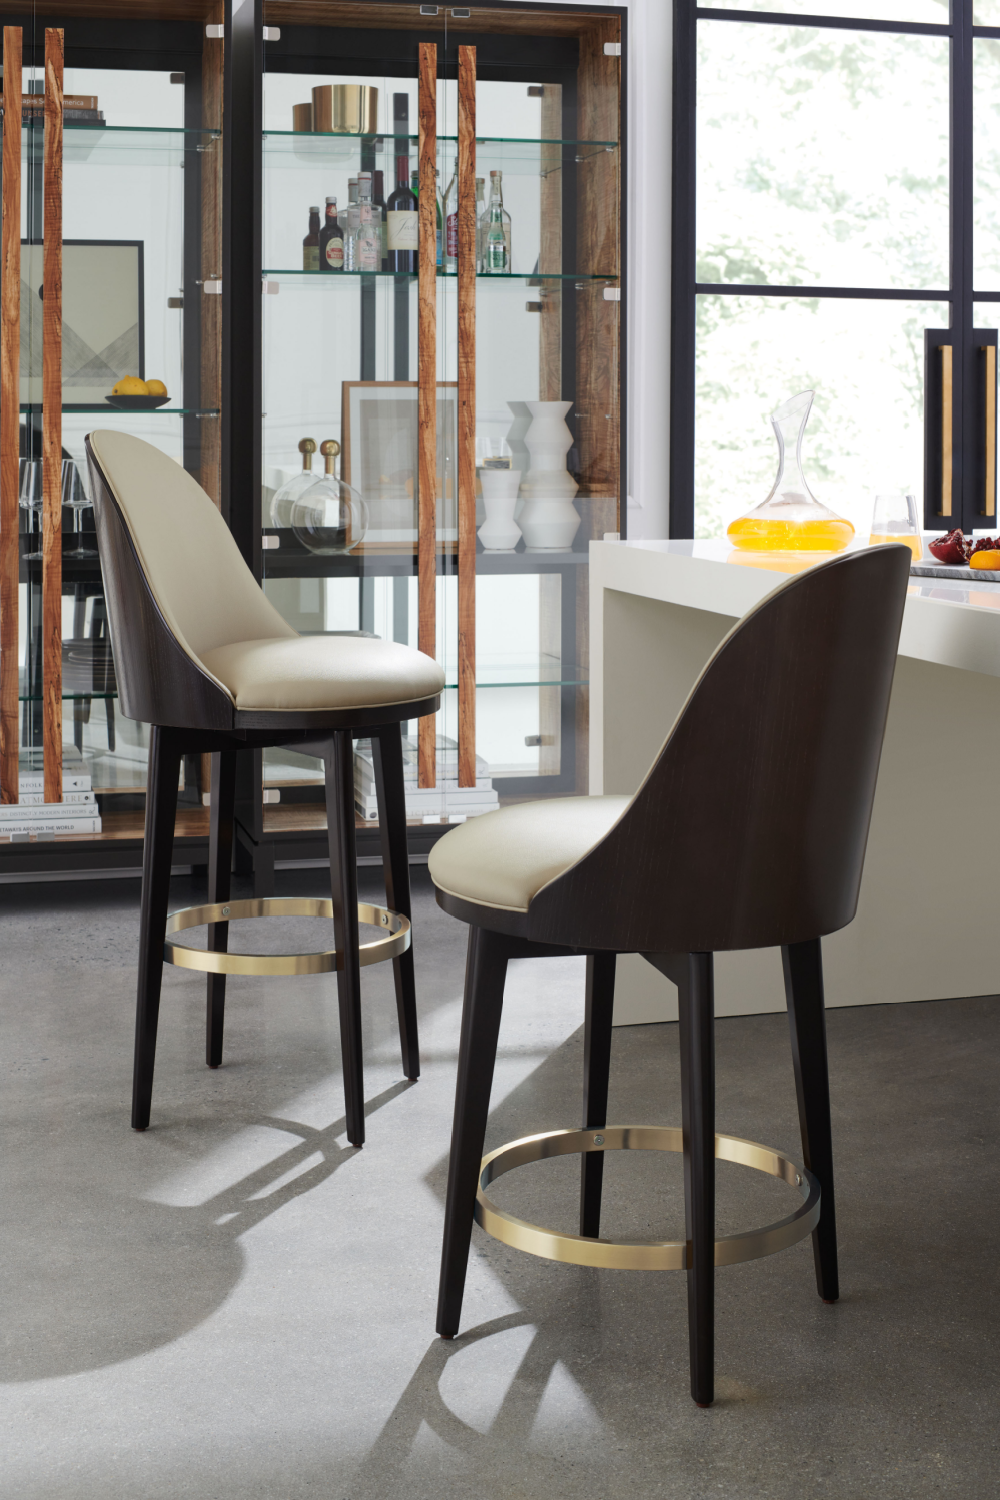 Vegan Leather Counter Stool | Caracole Another Round | Oroa.com